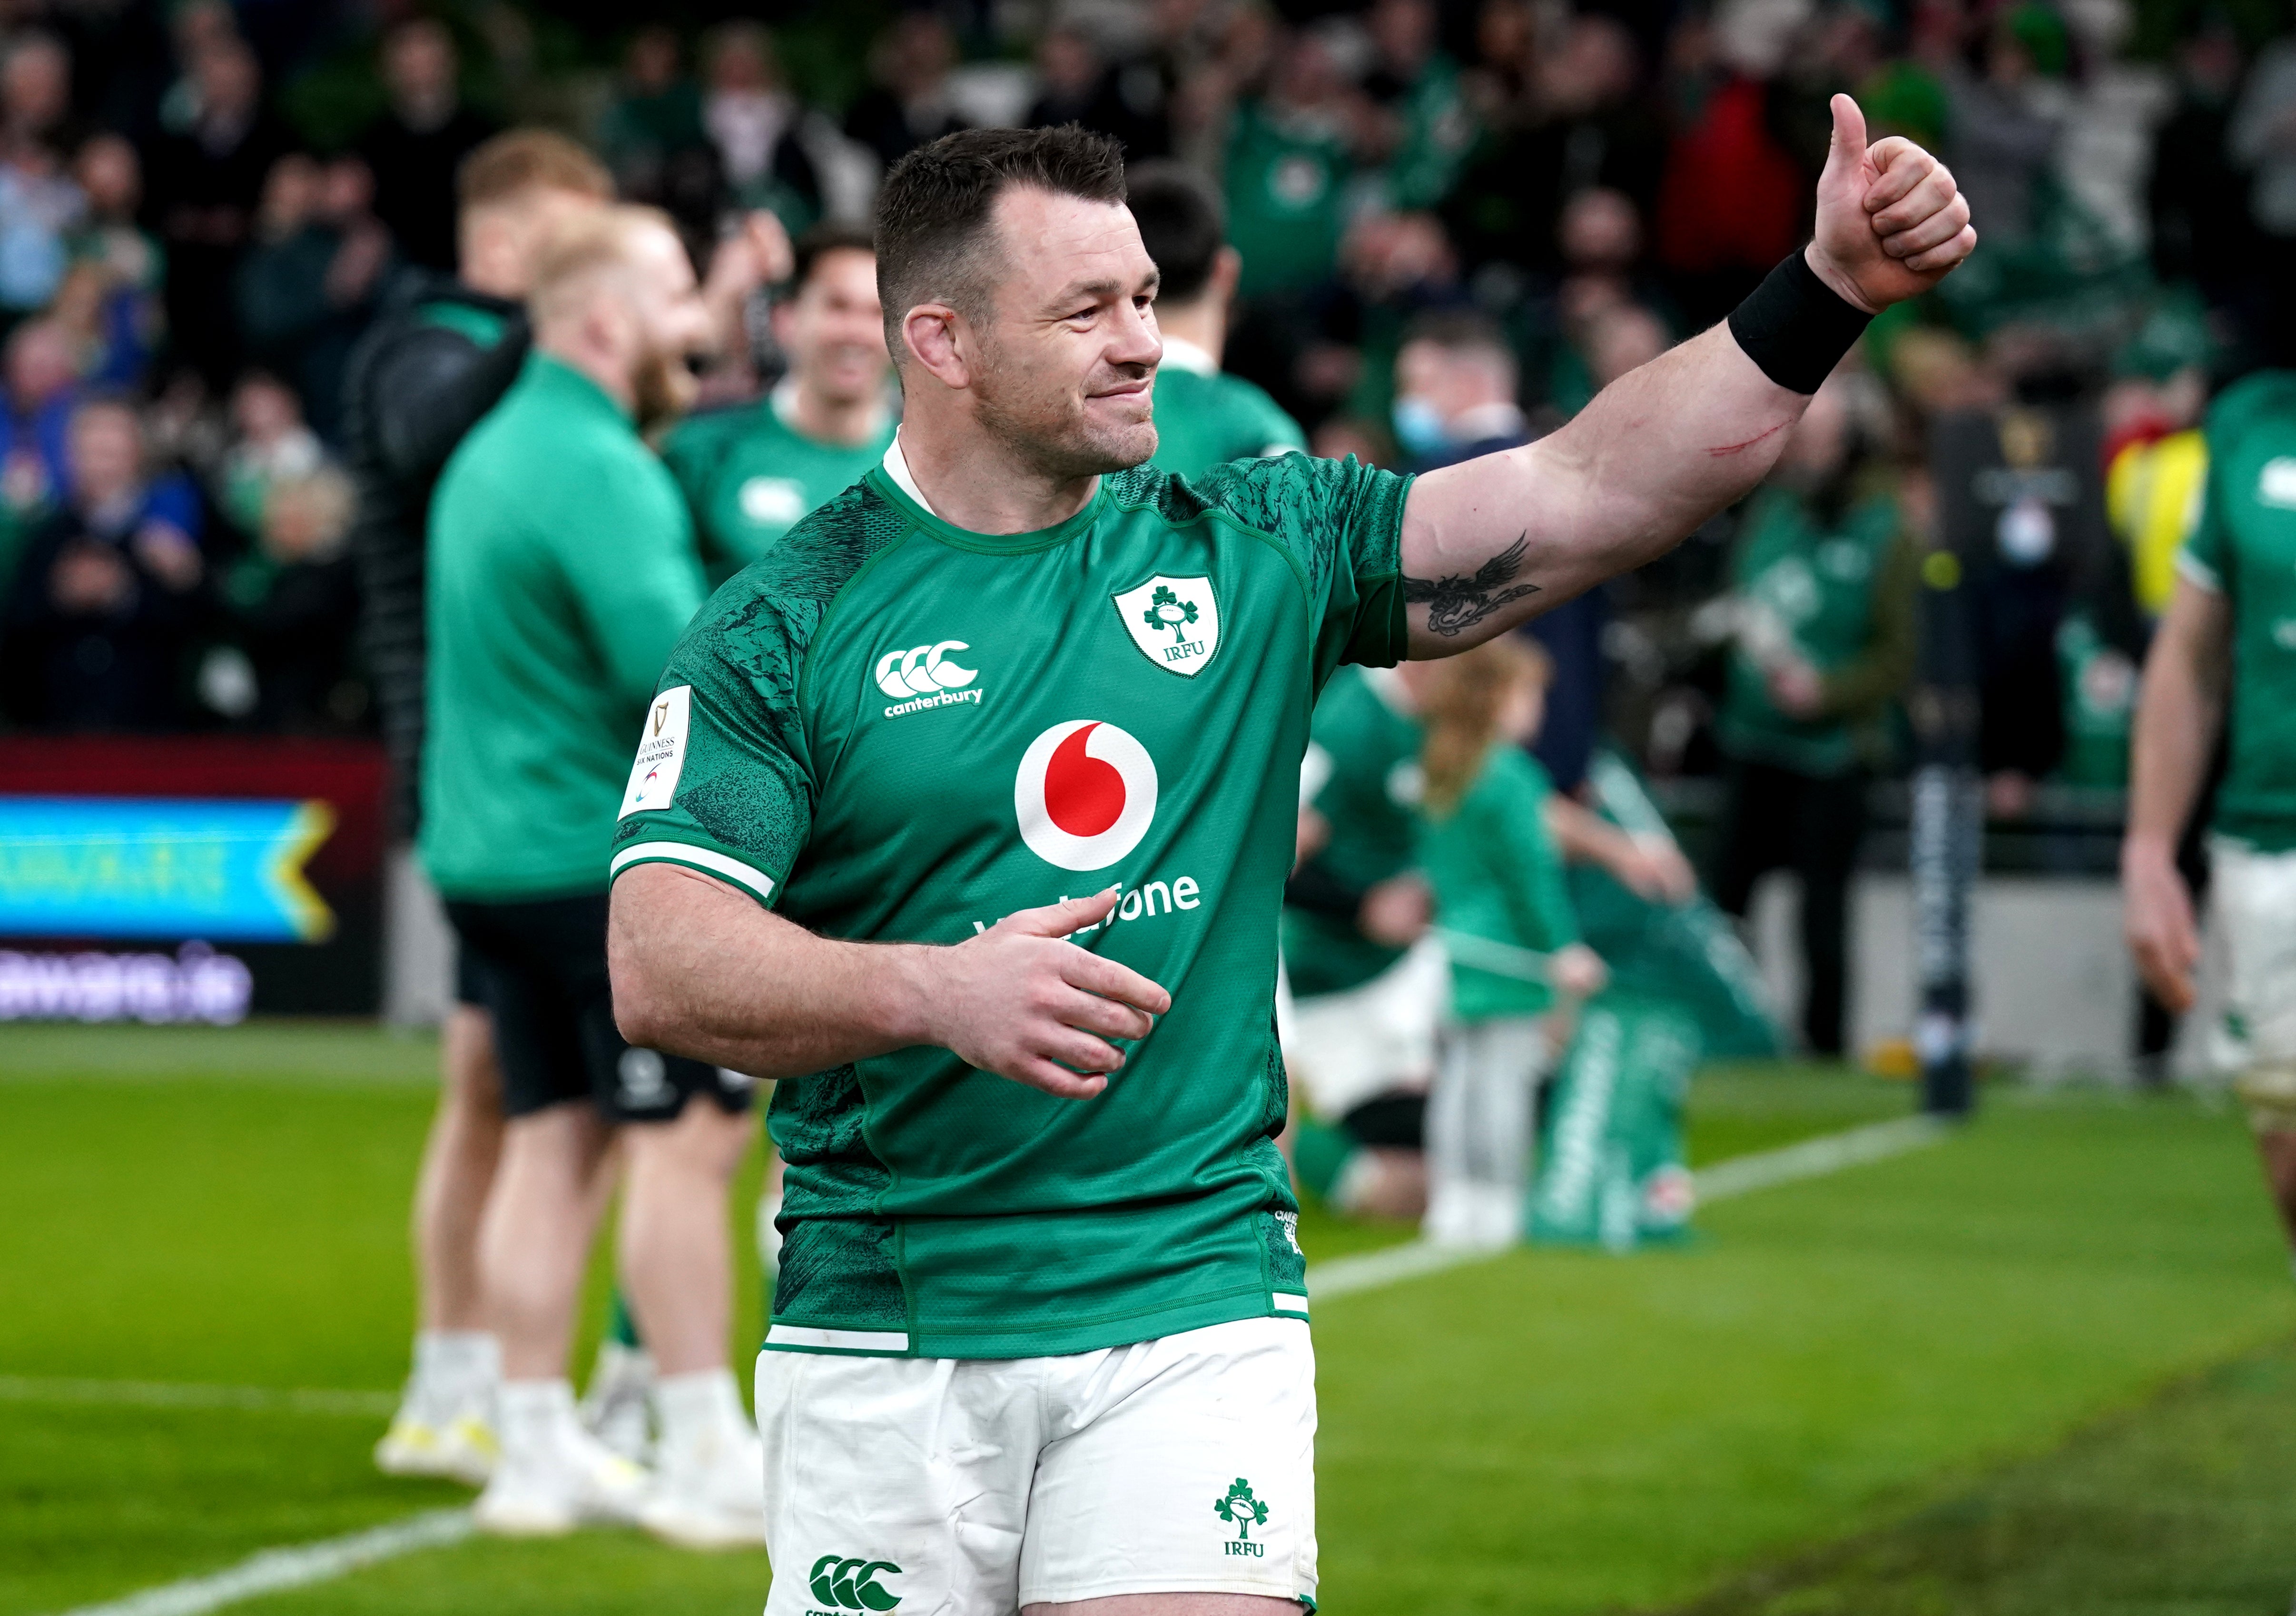 Ireland prop Cian Healy has been given the thumbs up after suffering injury (Brian Lawless/PA)